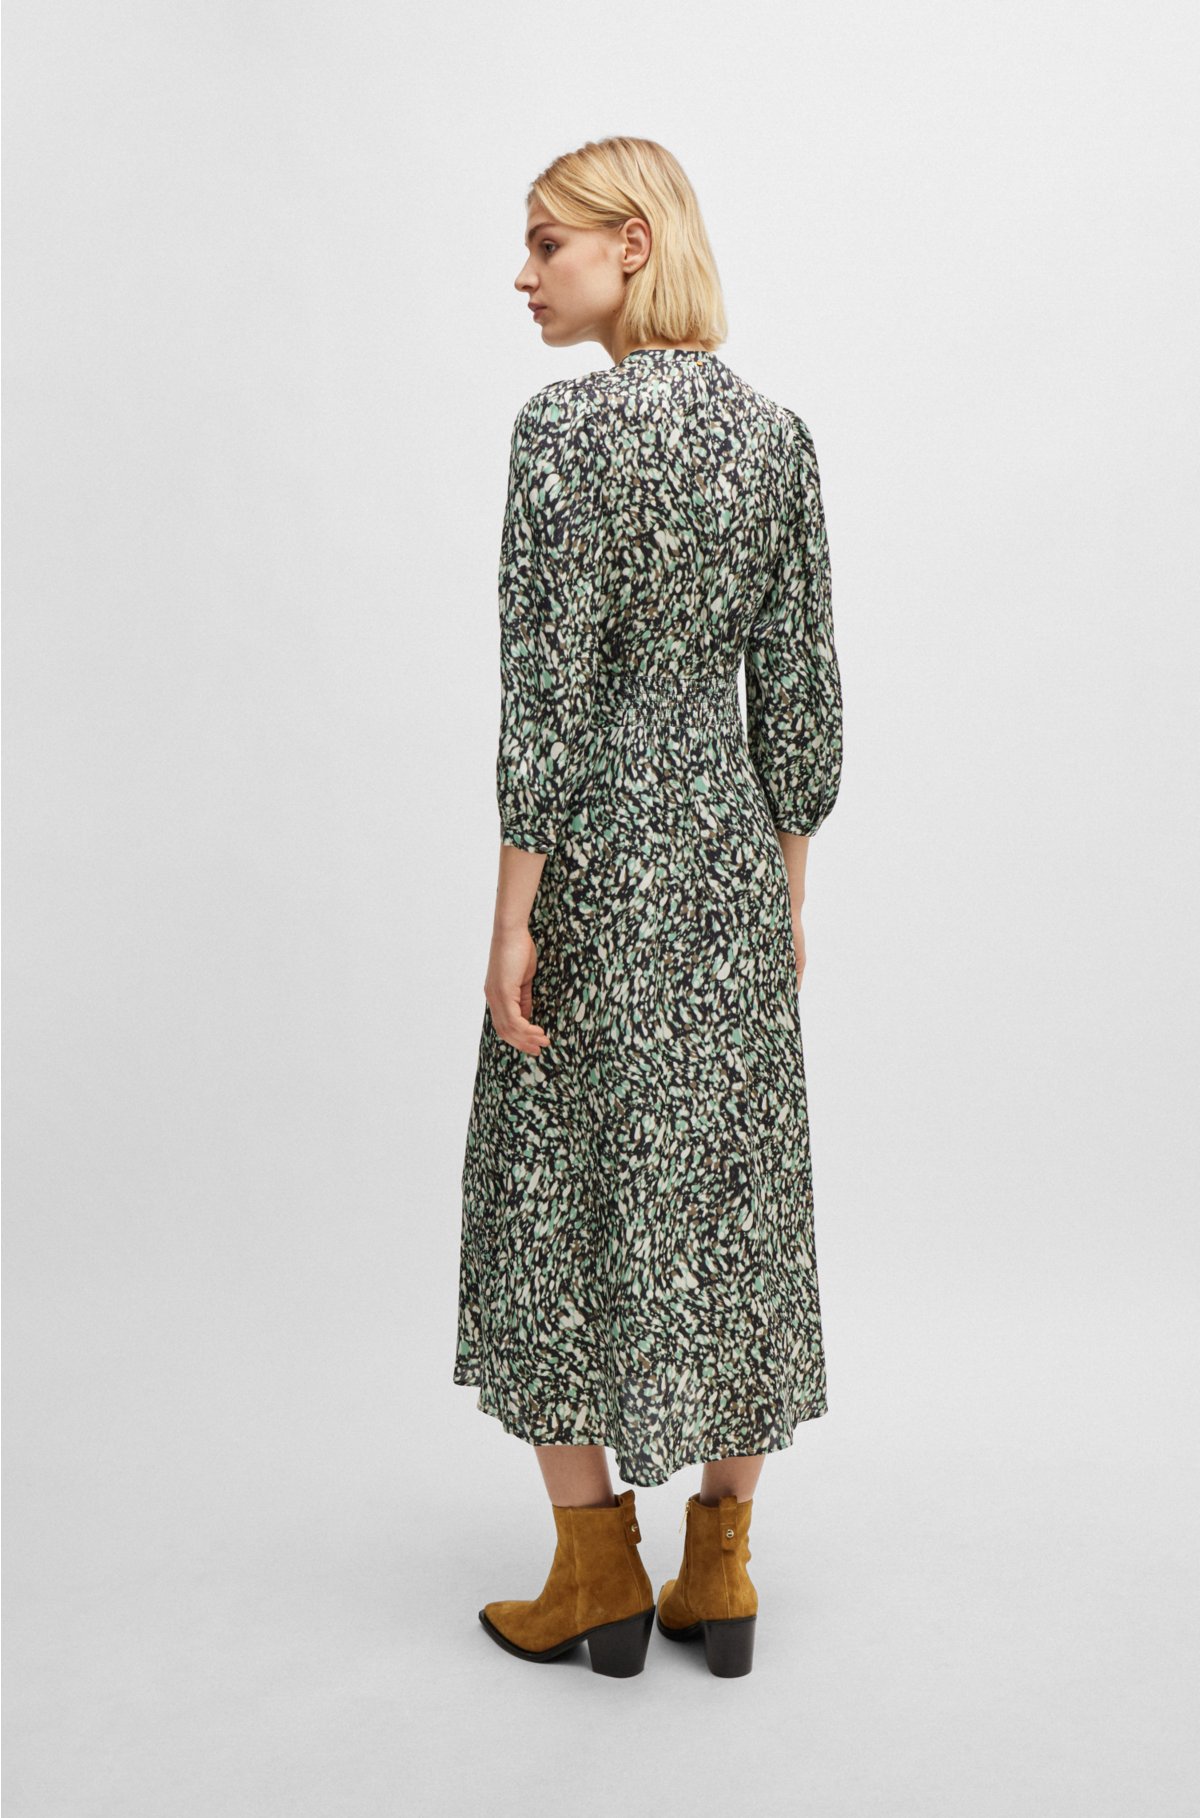 Long-sleeved dress in printed canvas with buttoned placket, Patterned